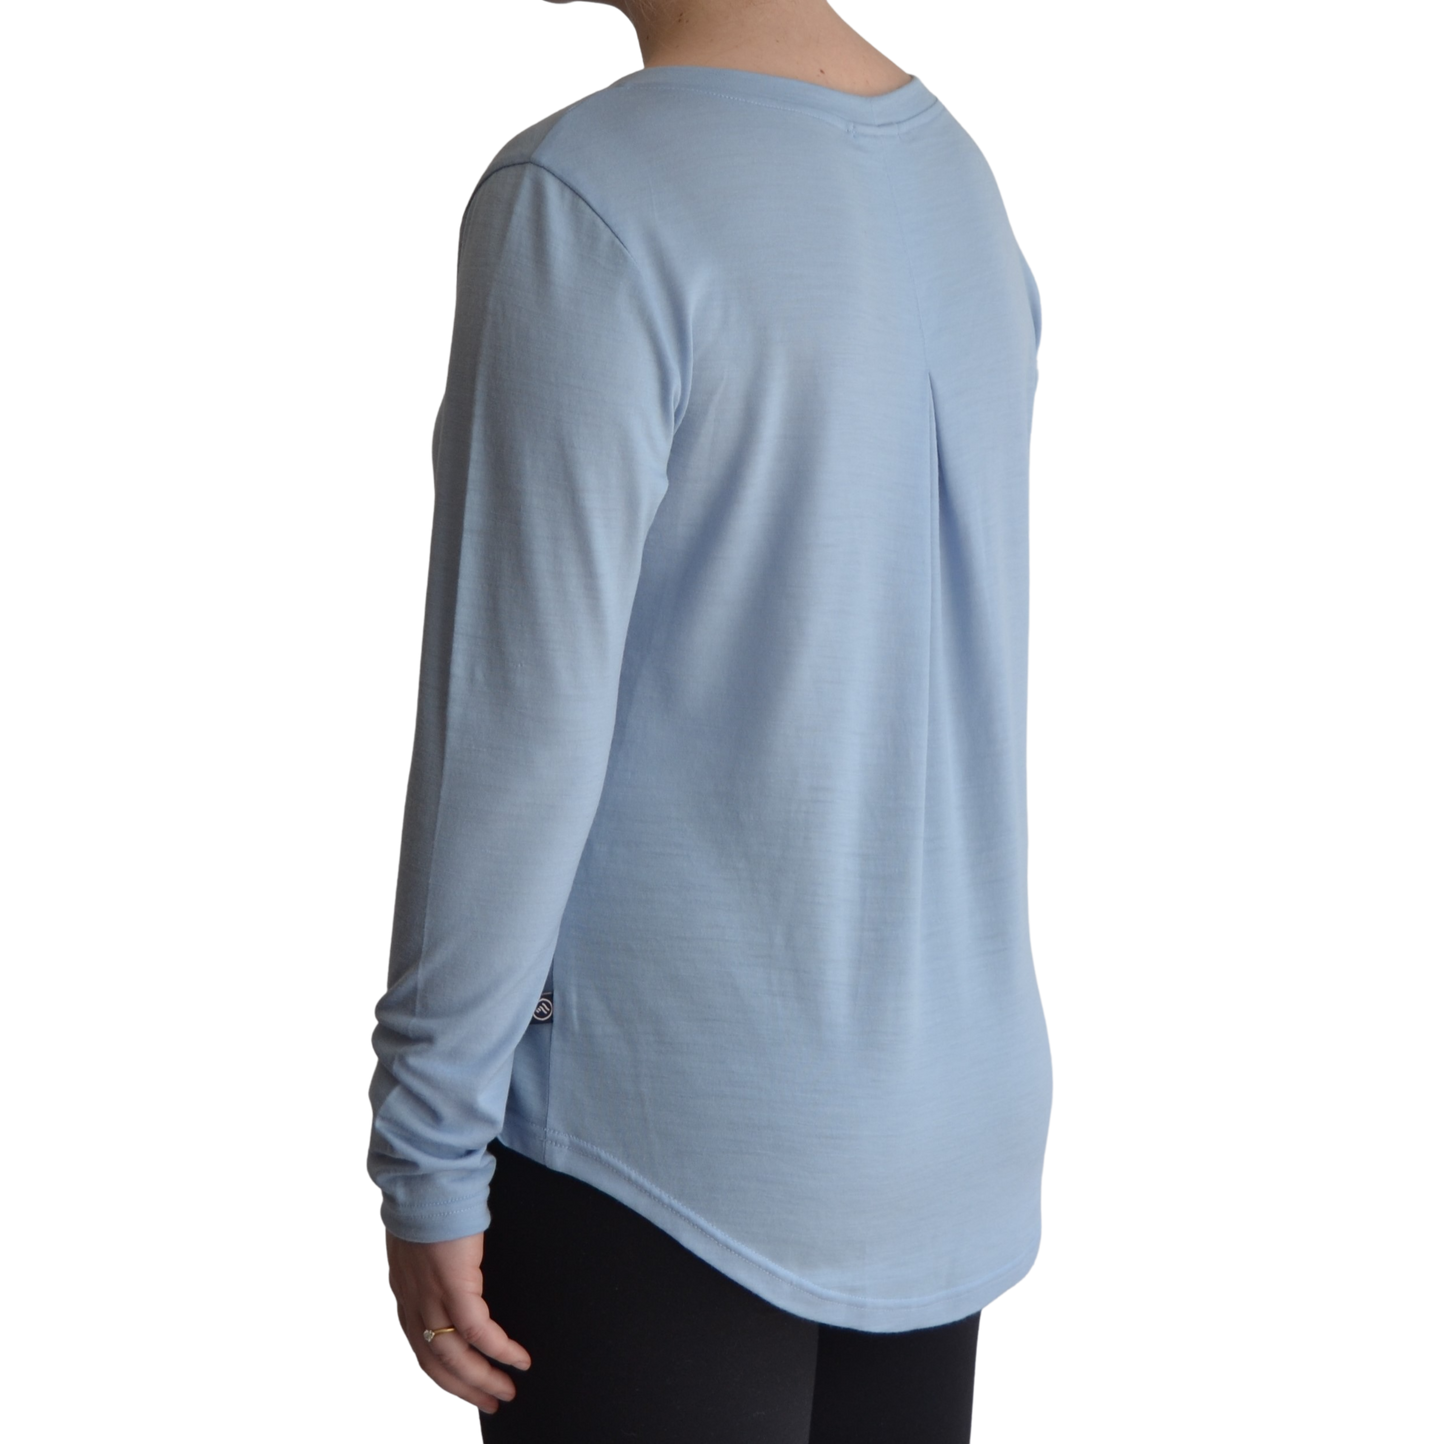 Links long sleeve merino top in ice blue colour. The model is standing on a 45 degree angle facing the back showing a dropped back hemline and box pleat. 